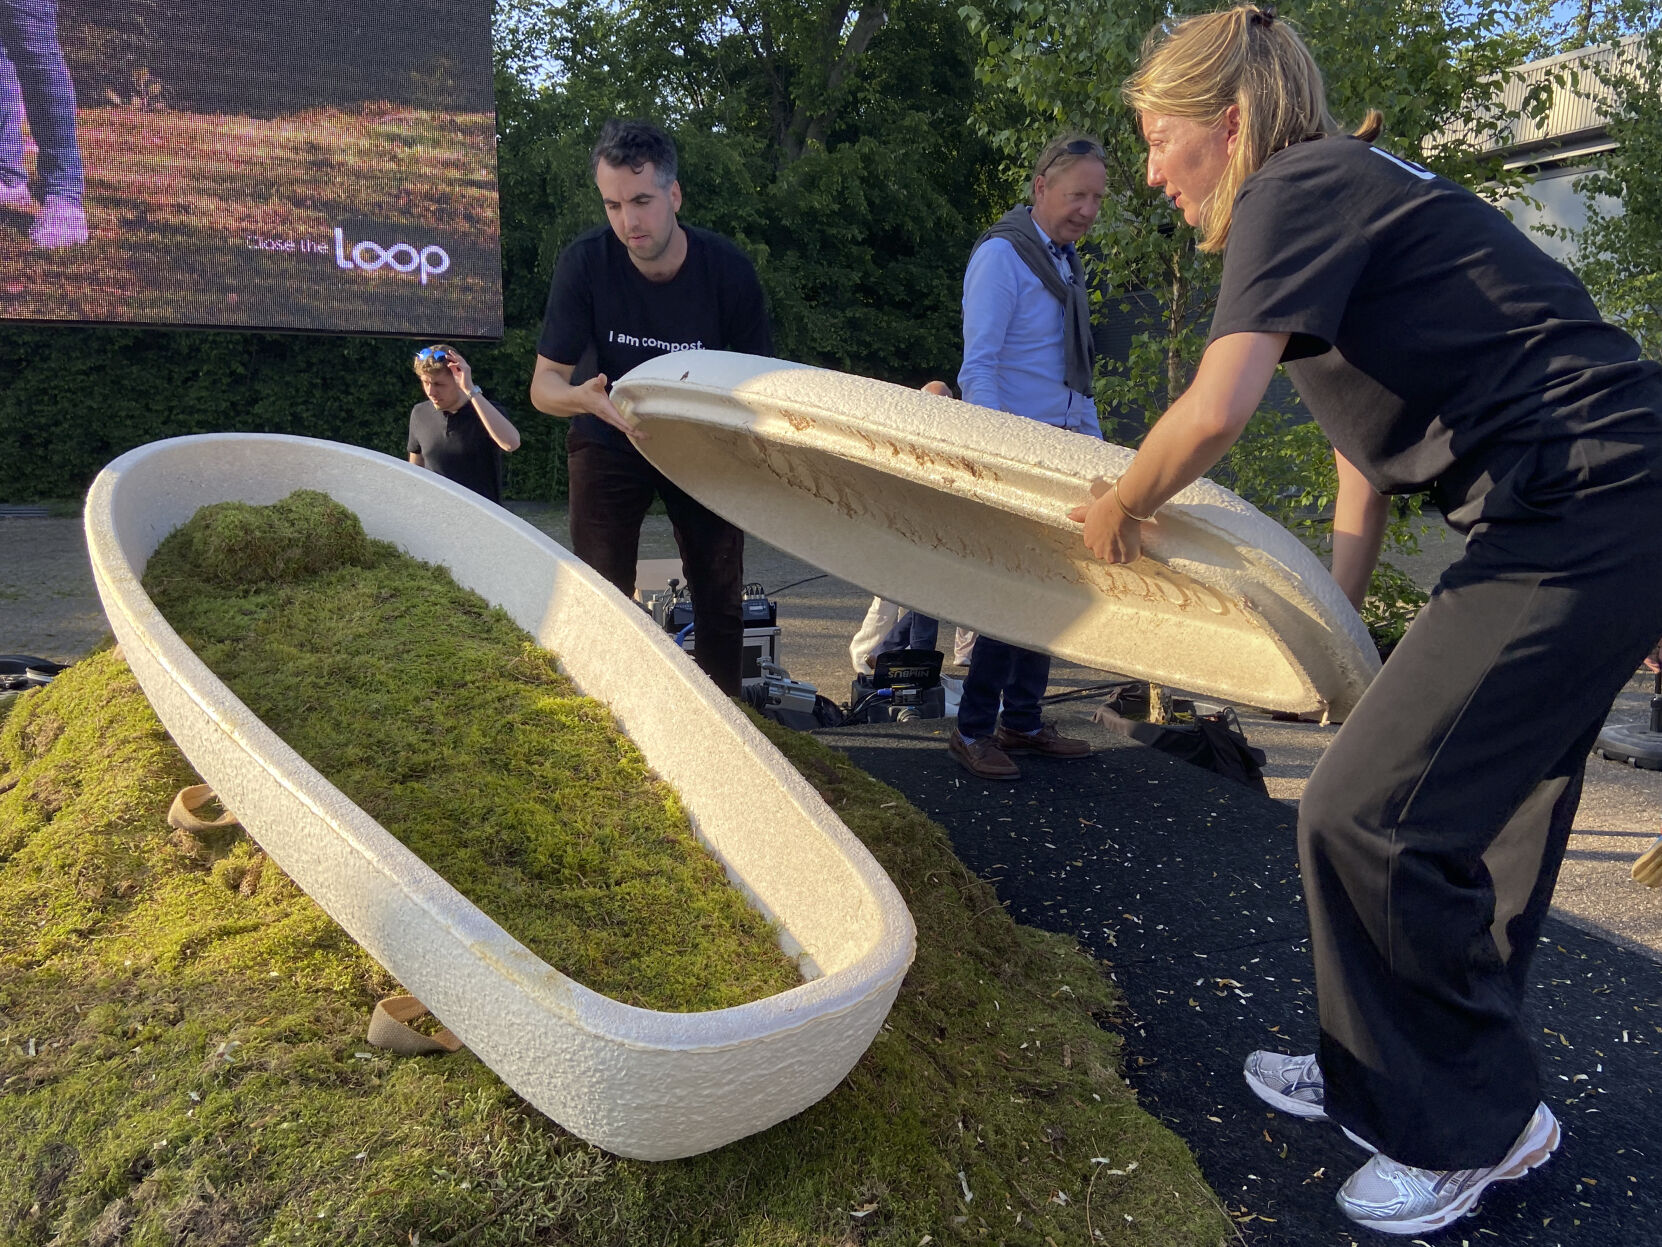 <p>Director Lonneke Westhoff, right, and founder Bob Hendrikx, left, of Dutch startup Loop Biotech display one of the cocoon-like coffins, grown from local mushrooms and up-cycled hemp fibres, designed to dissolve into the environment amid growing demand for more sustainable burial practices, in Delft, Netherlands, Monday, May 22, 2023. A Dutch intrepid inventor is now “growing” coffins by putting mycelium, the root structure of mushrooms, together with hemp fiber in a special mold that, in a week, turns into what could basically be compared to the looks of an unpainted Egyptian sarcophagus. (AP Photo/Aleksandar Furtula)</p>   PHOTO CREDIT: Aleksandar Furtula 